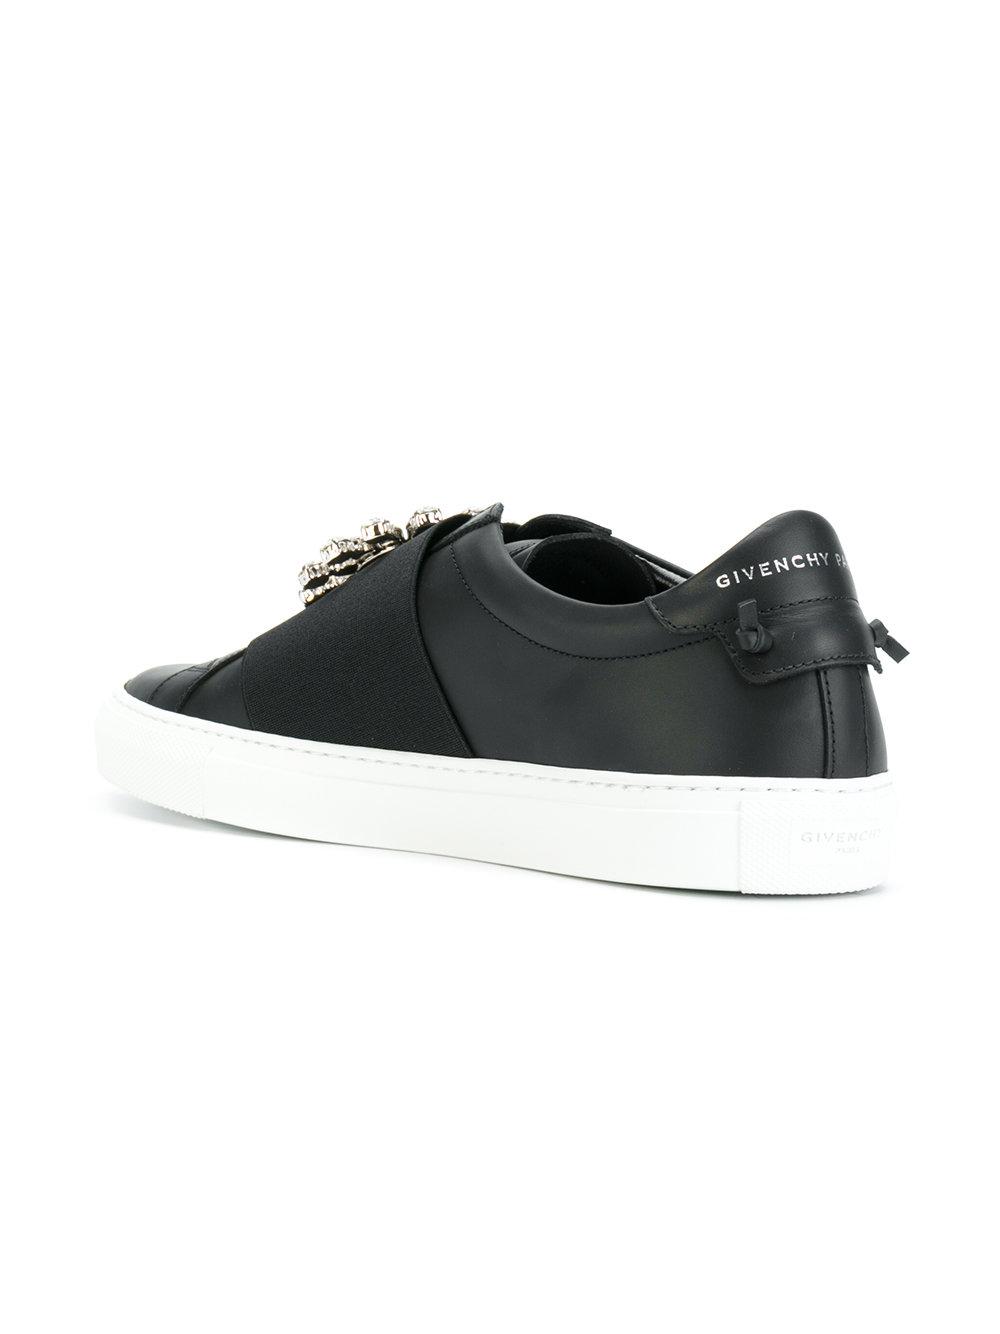 Lyst - Givenchy Embellished Slip-on Sneakers in Black